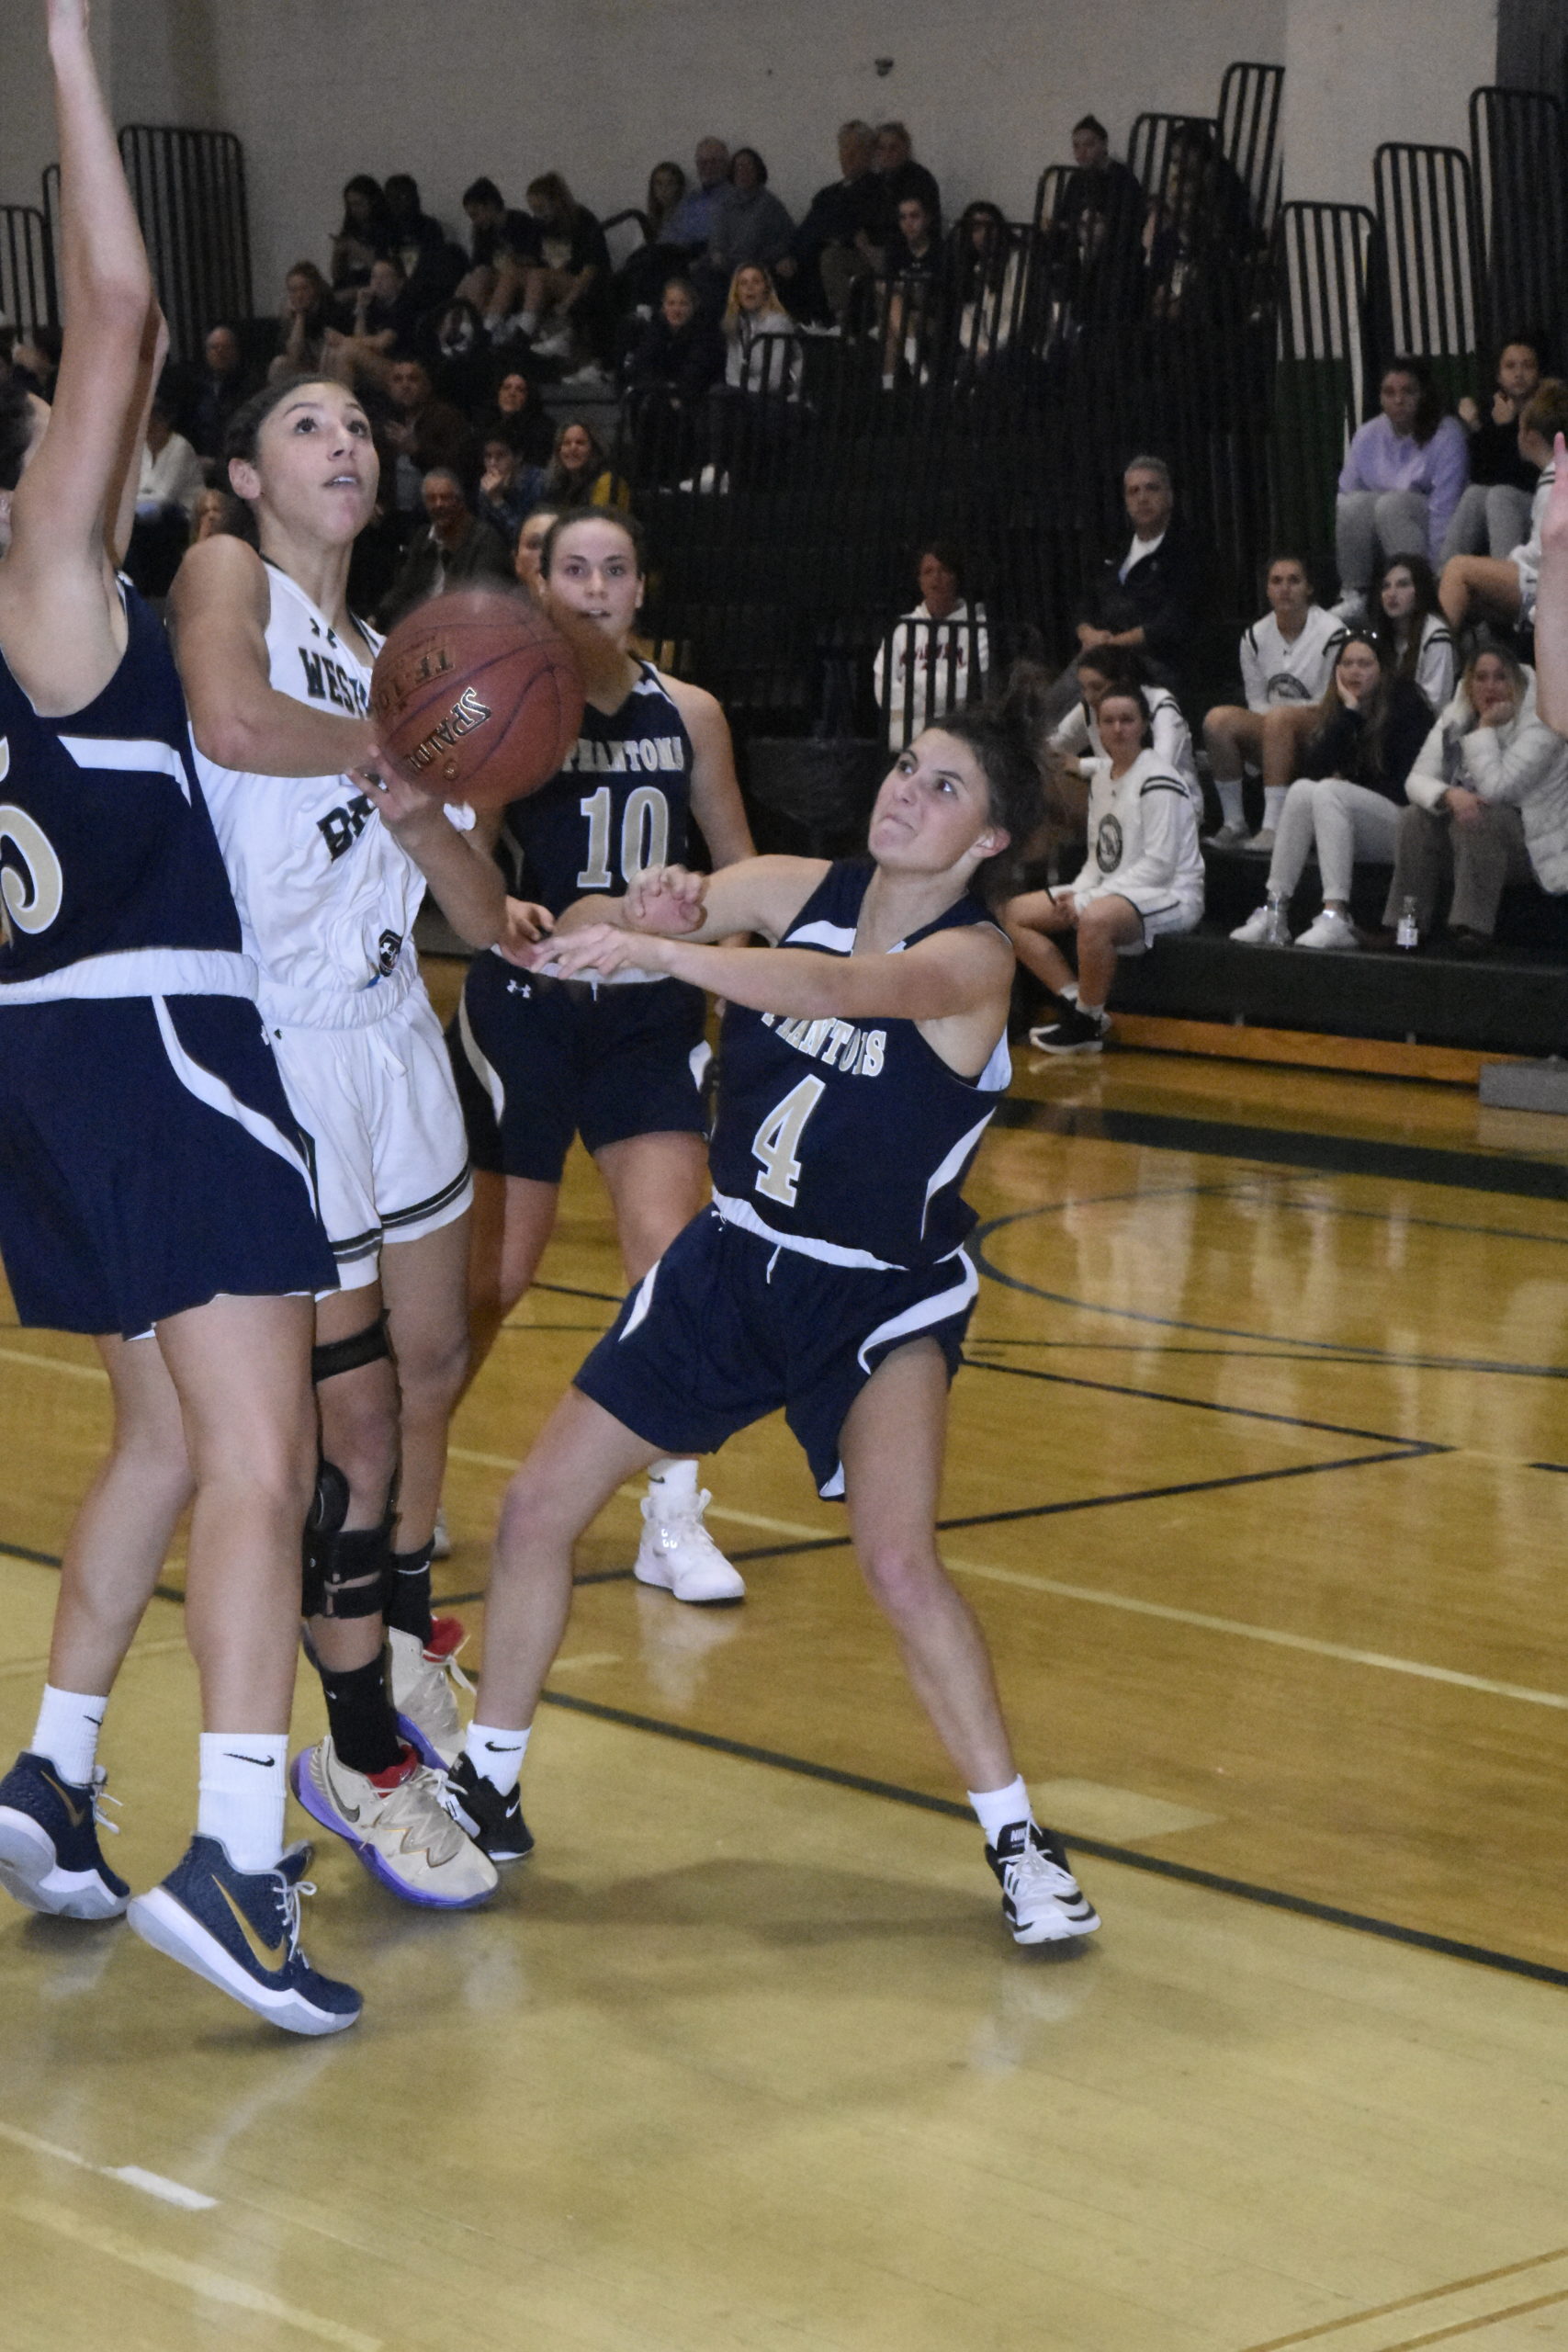 Westhampton Beach senior Layla Mendoza takes down a few Bayport defender down low in the paint.